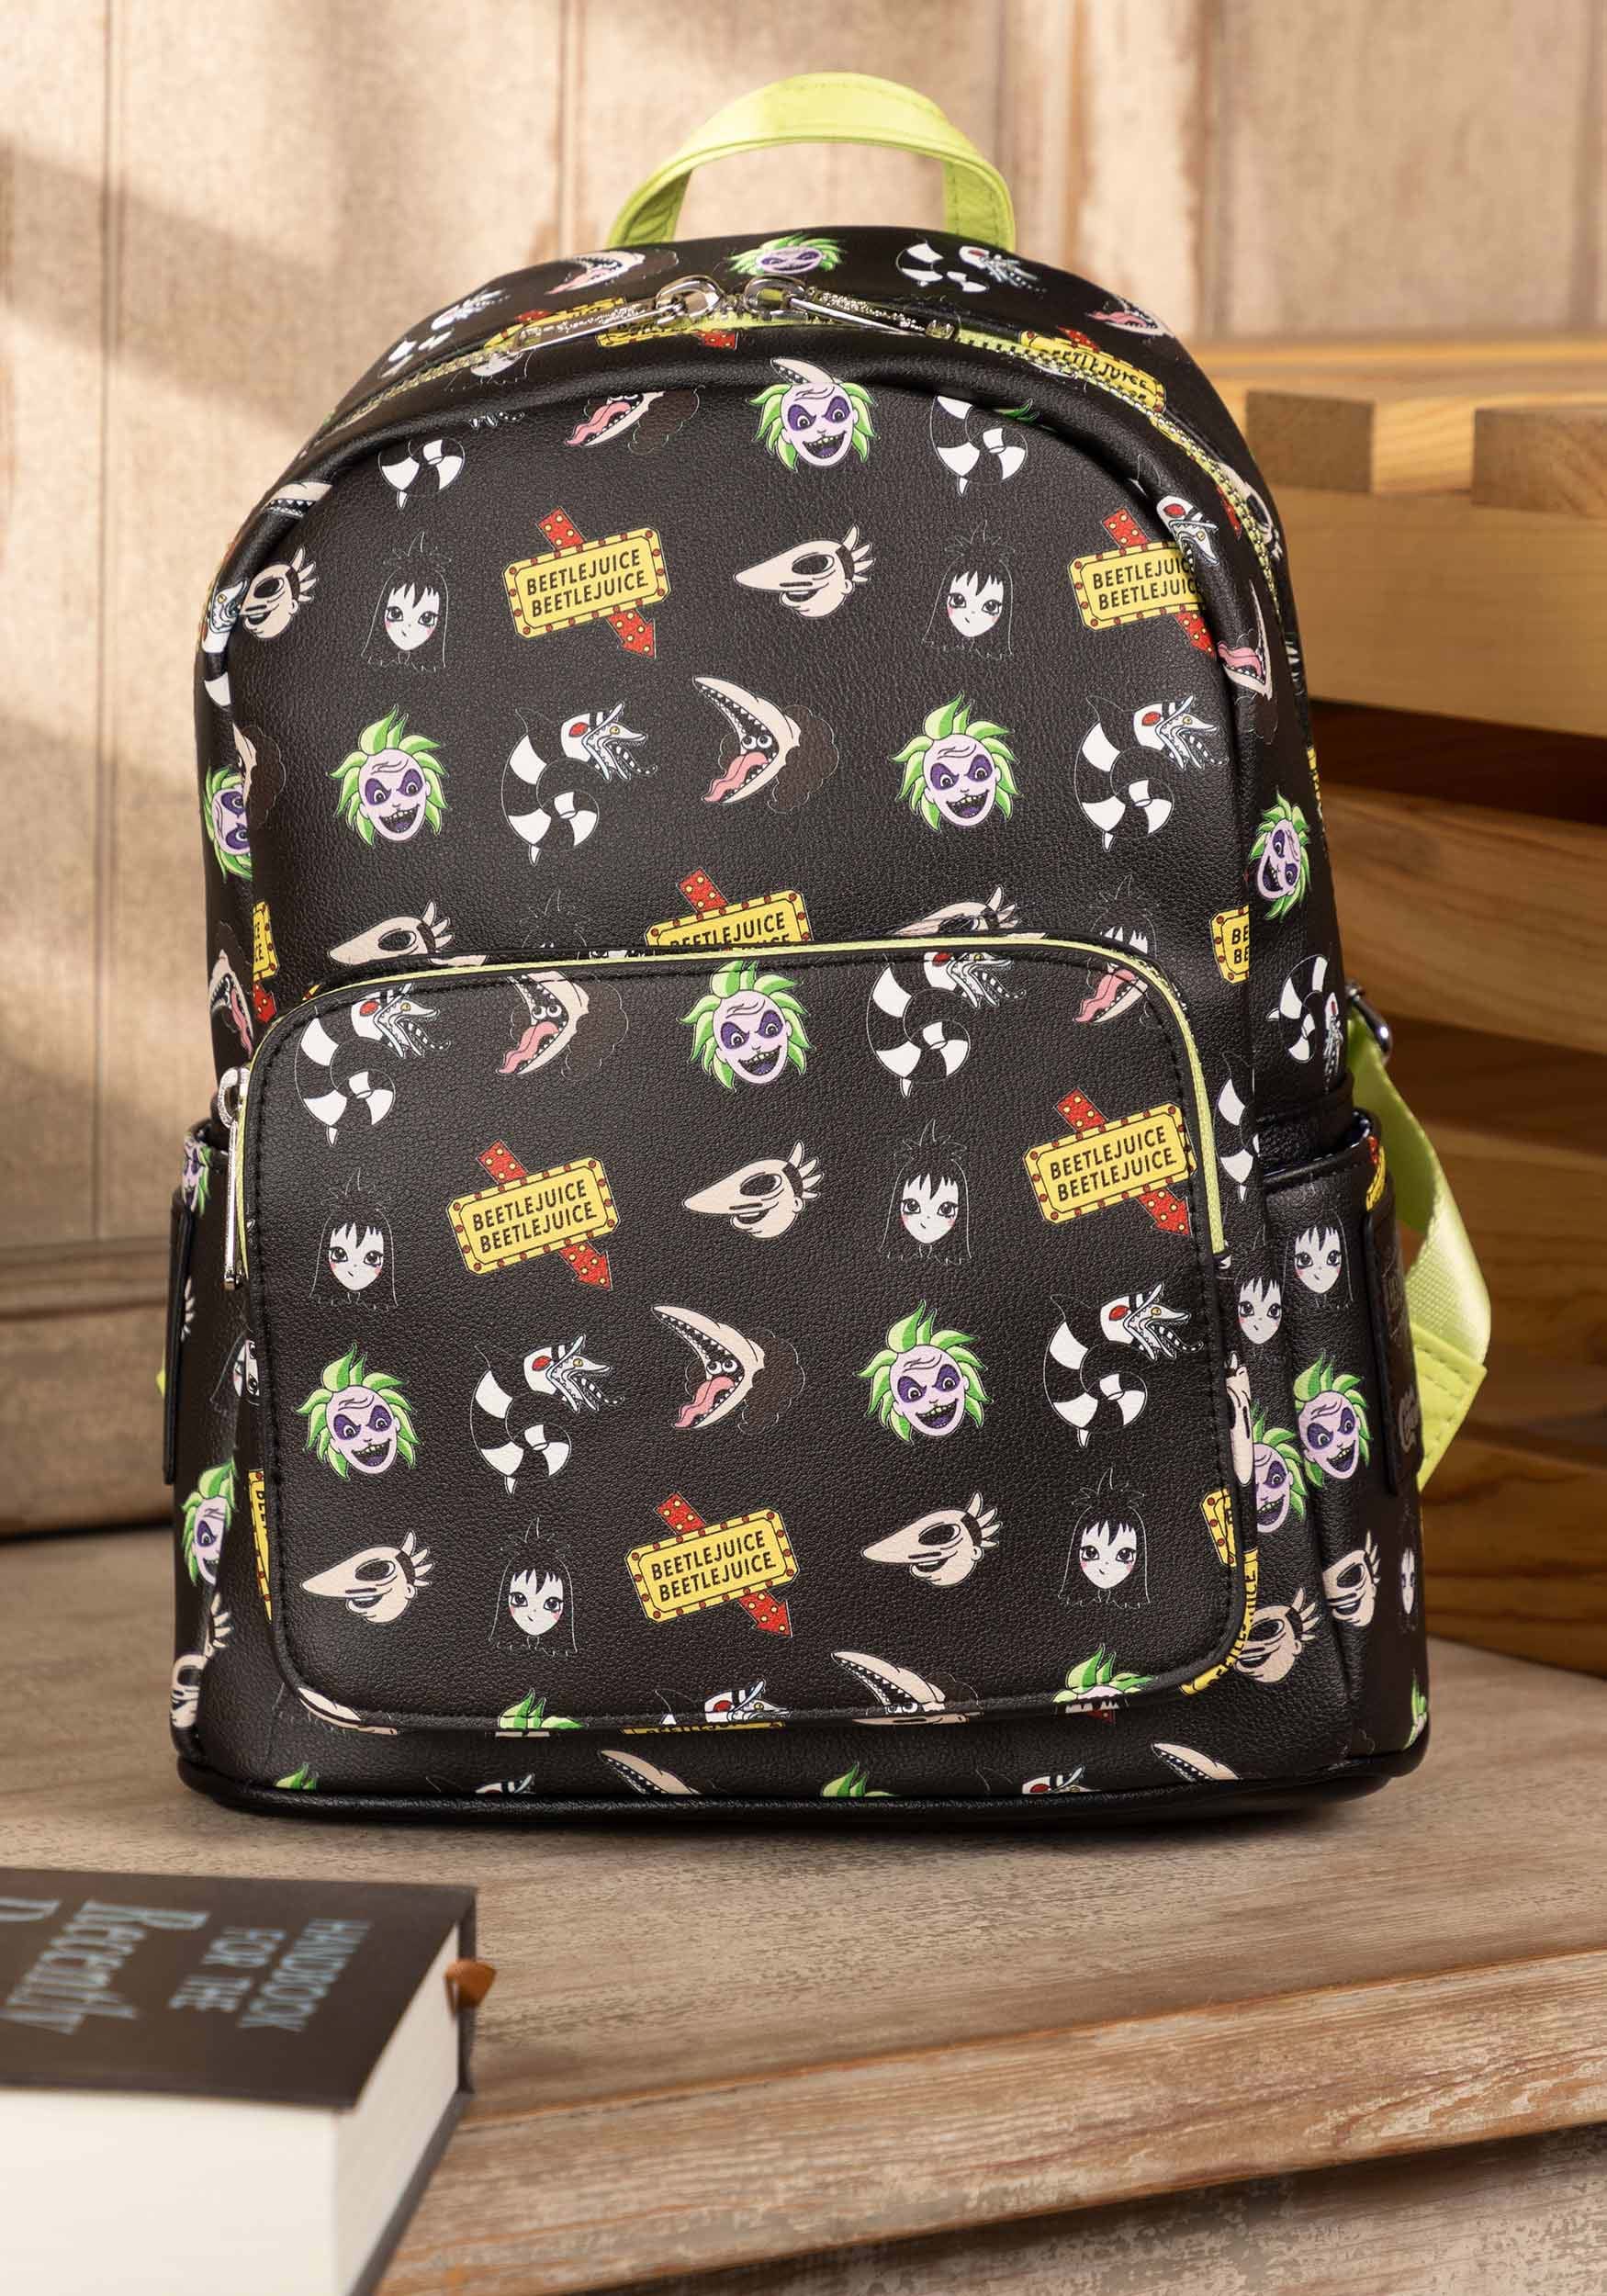 New WWE backpack with lunch bag 10.00